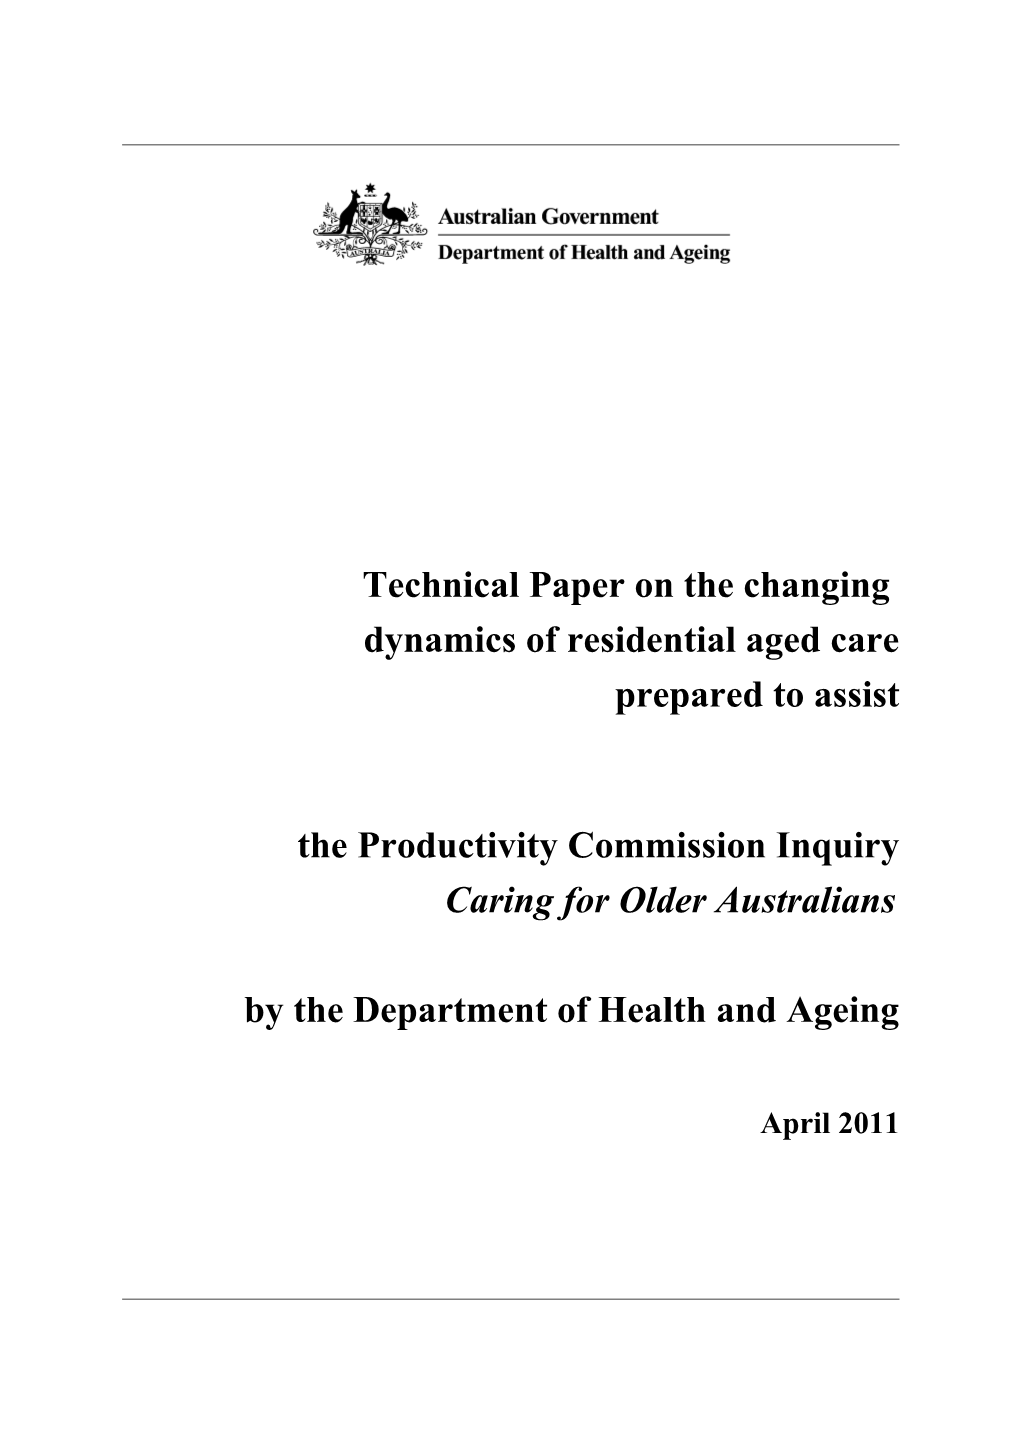 Changing Dynamics of Residential Aged Care - Technical Paper - Caring for Older Australians